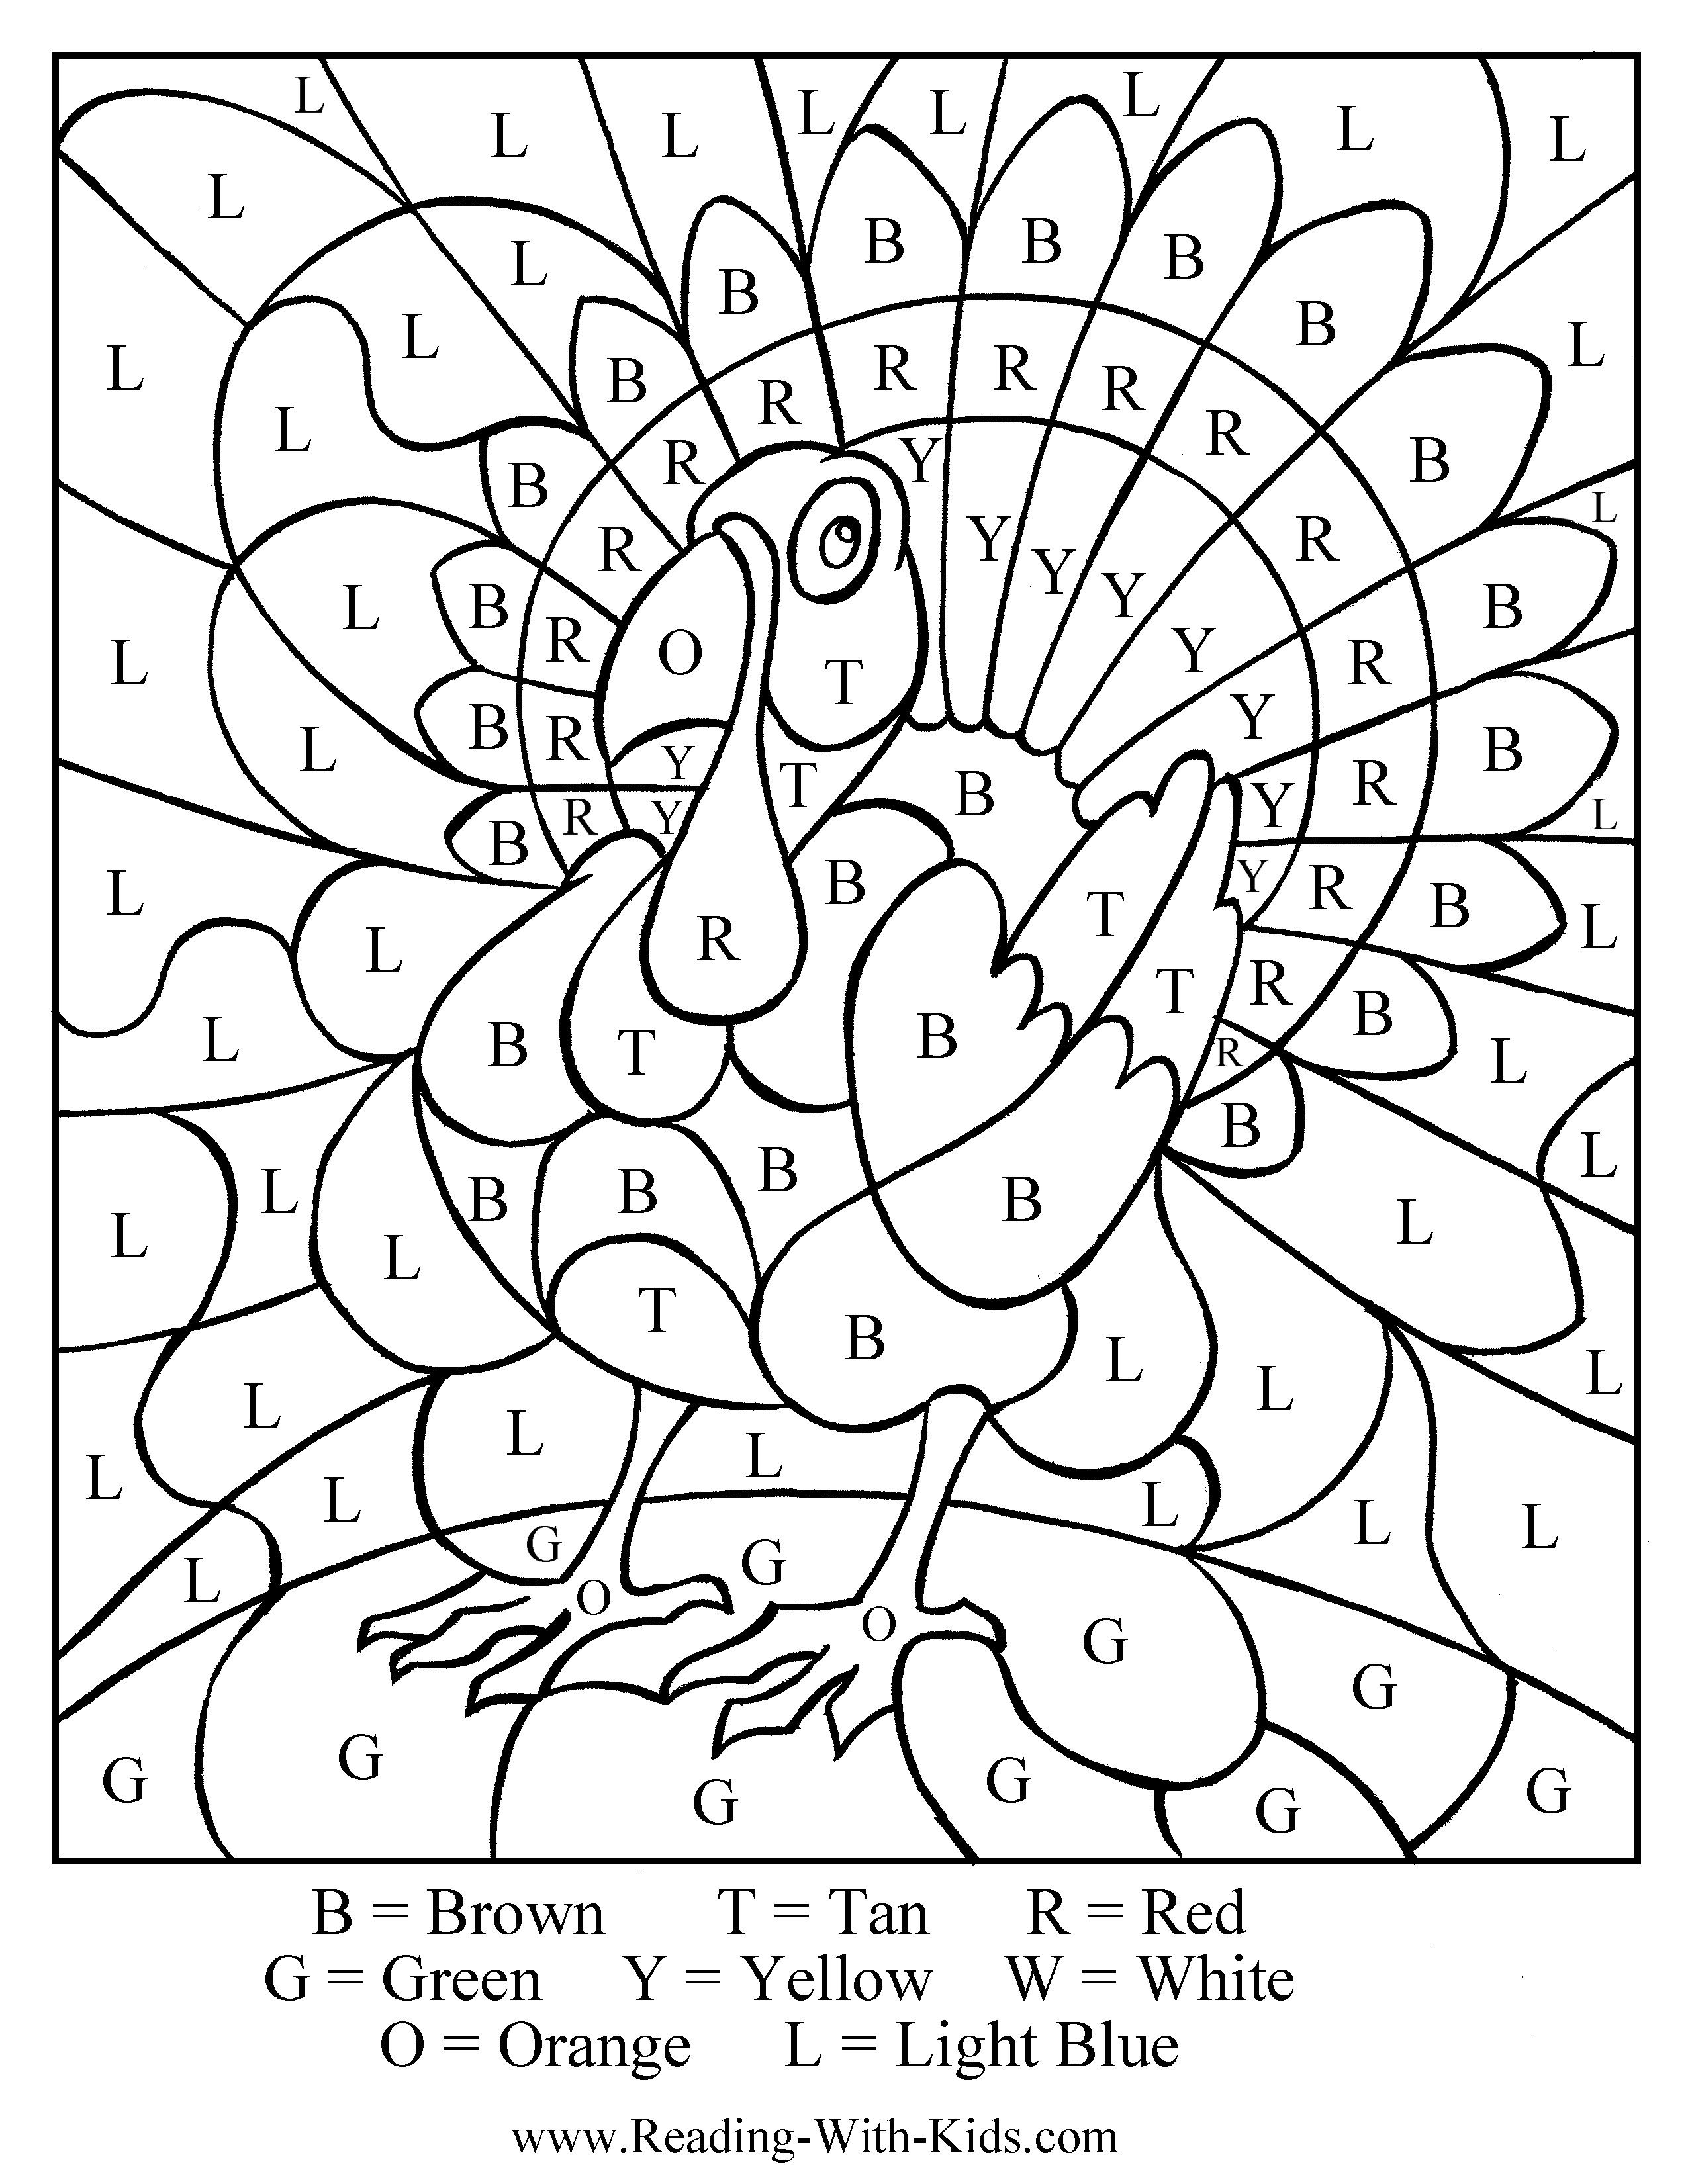 Colorletter Turkey - Great Idea For Thanksgiving #thanksgiving - Free Printable Thanksgiving Worksheets For Middle School